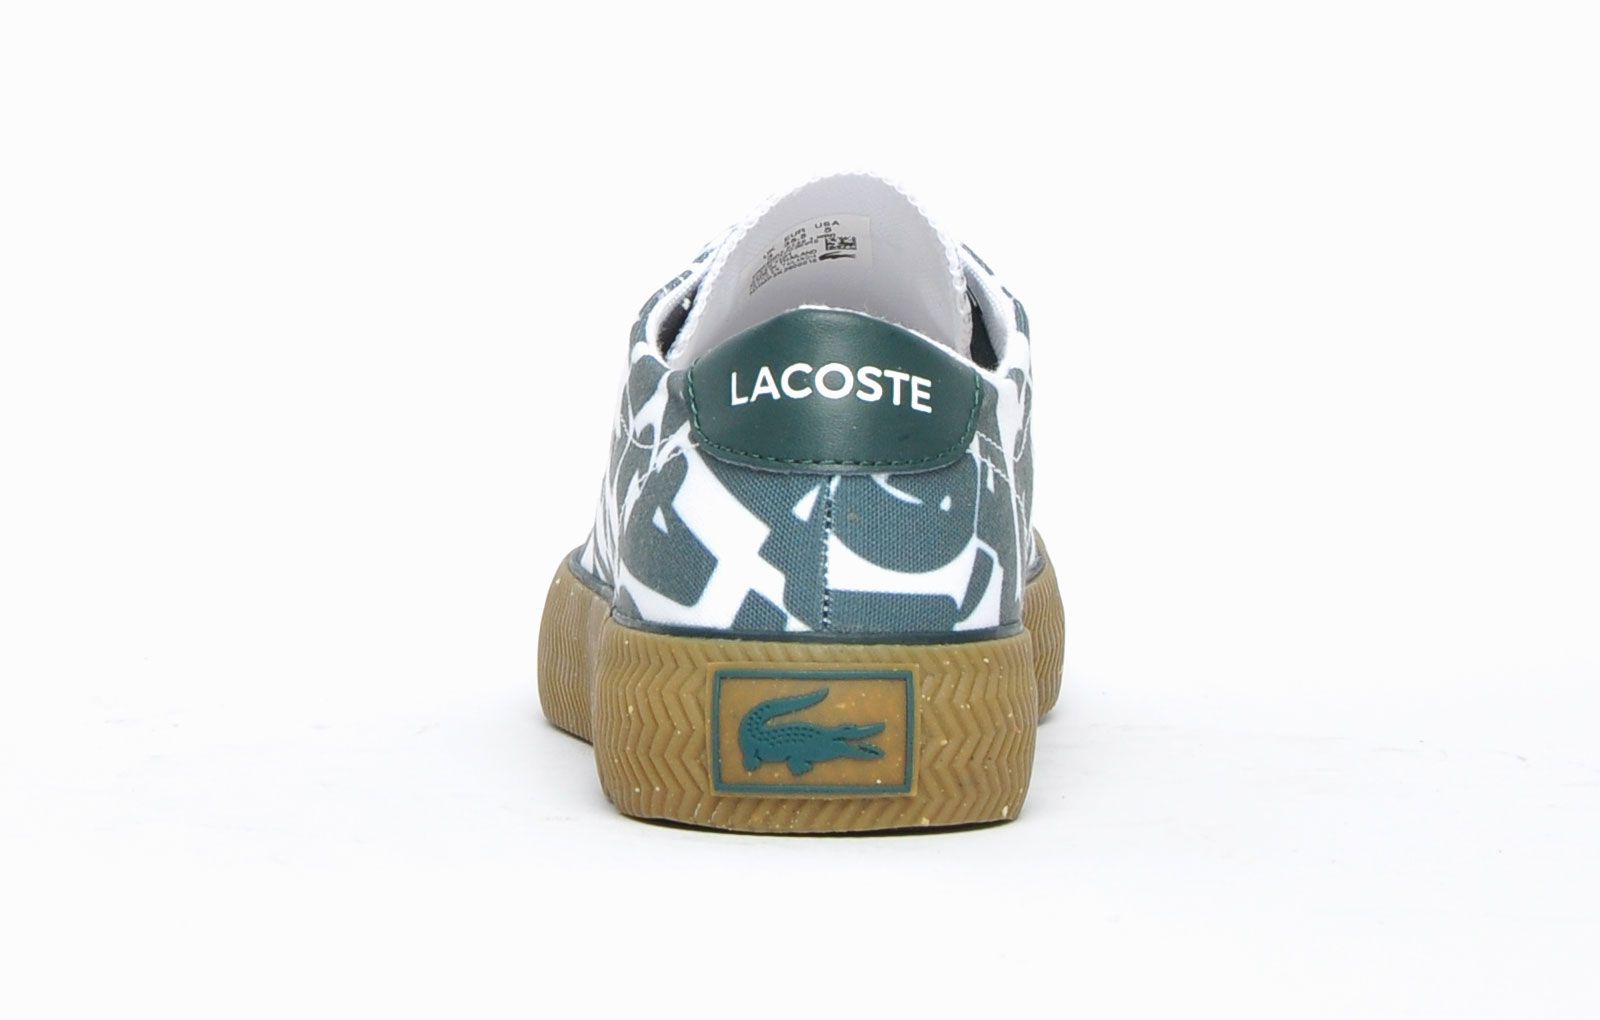 With its premium construction and classic plimsol silhouette presented in a smart white colourway with a bold all over graphic green print, these Lacoste Gripshot trainers deliver a look thats both casual and stylish. A durable rubber outsole and full lace closure, mean these Lacoste Gripshot trainers are full of designer touches, premium craftmanship and finished off with the famous Lacoste Croc on the side, this classic trainer will deliver a touch of laid-back style to any casual or dress outfit. - Premium canvas / textile / synthetic mix upper
 - Classic lace up fit
 - Ortholite comfort footbed
 - Textured vintage styled midsole
 - Durable rubber outsole
 - Lacoste branding throughout